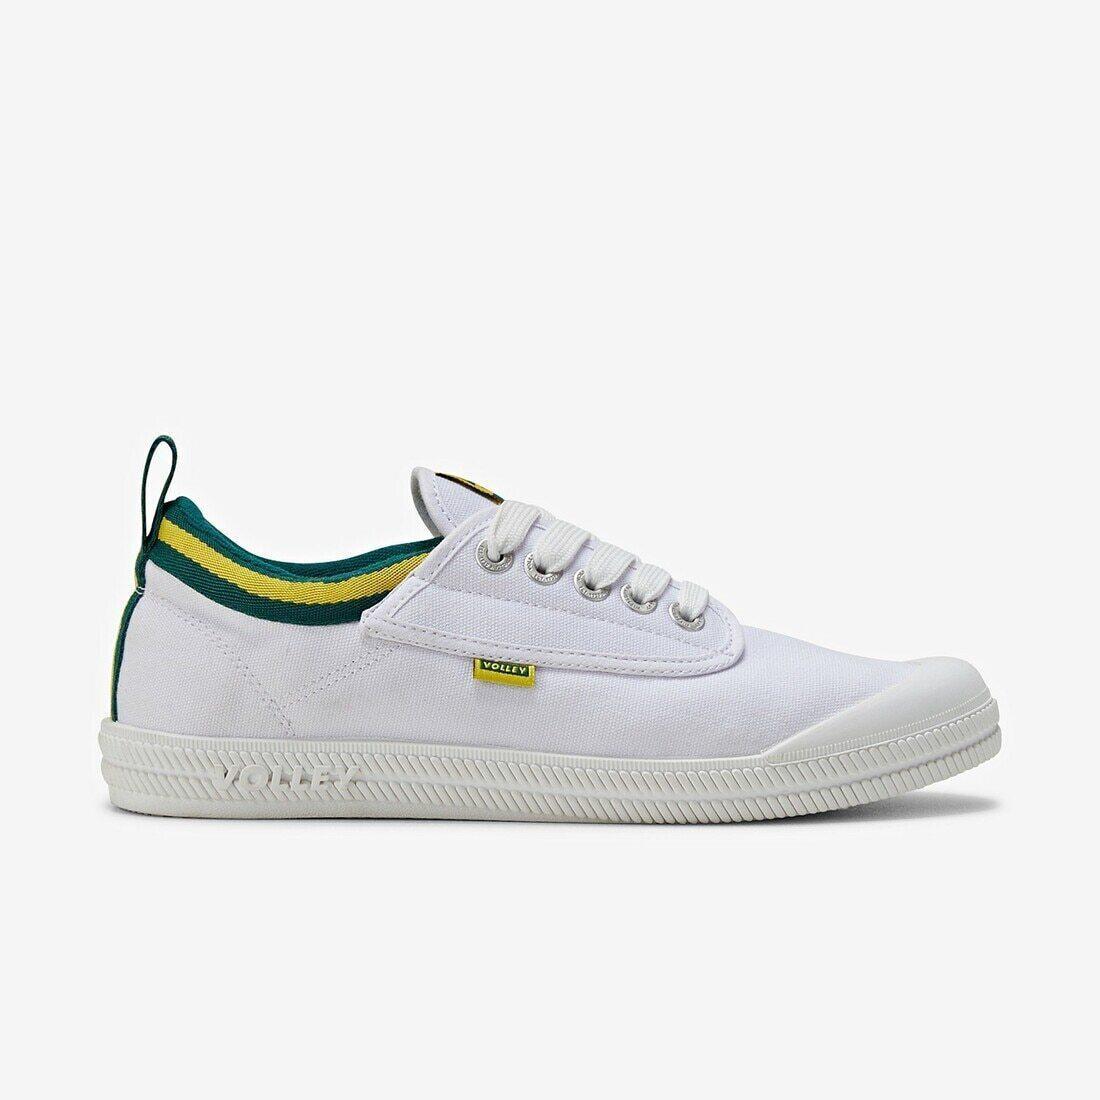 Dunlop Volleys International Volley Low Canvas Casual Mens Shoes Sneakers - White/Green/Gold - Mens US6/EU39/UK5